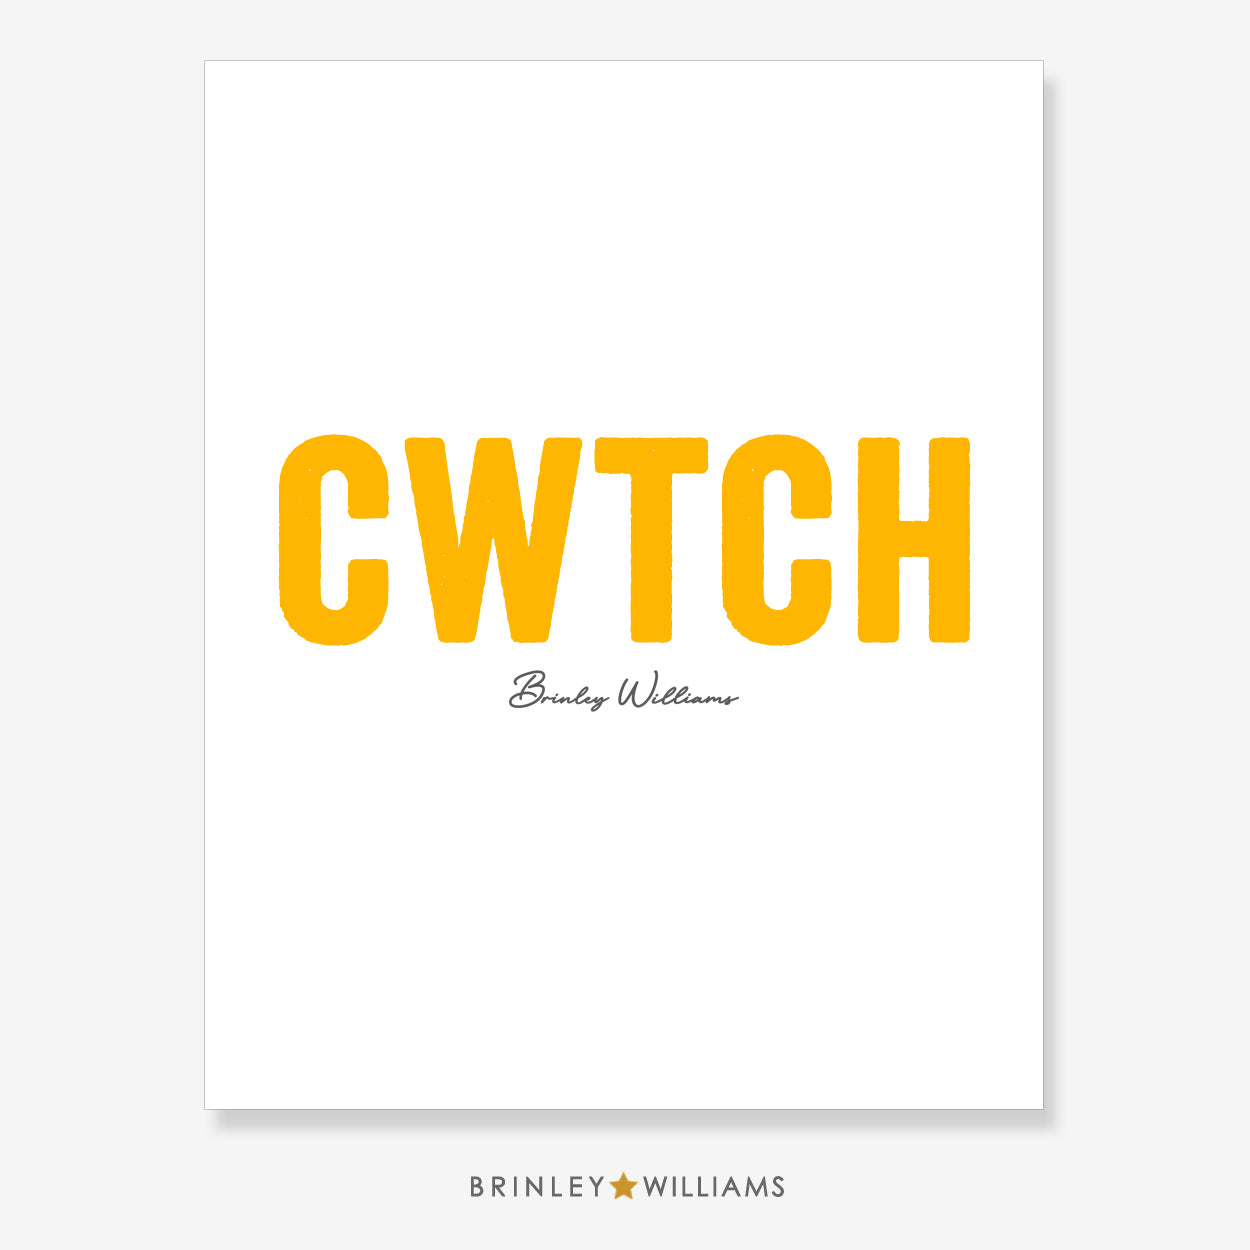 Big Cwtch Wall Art Poster - Yellow